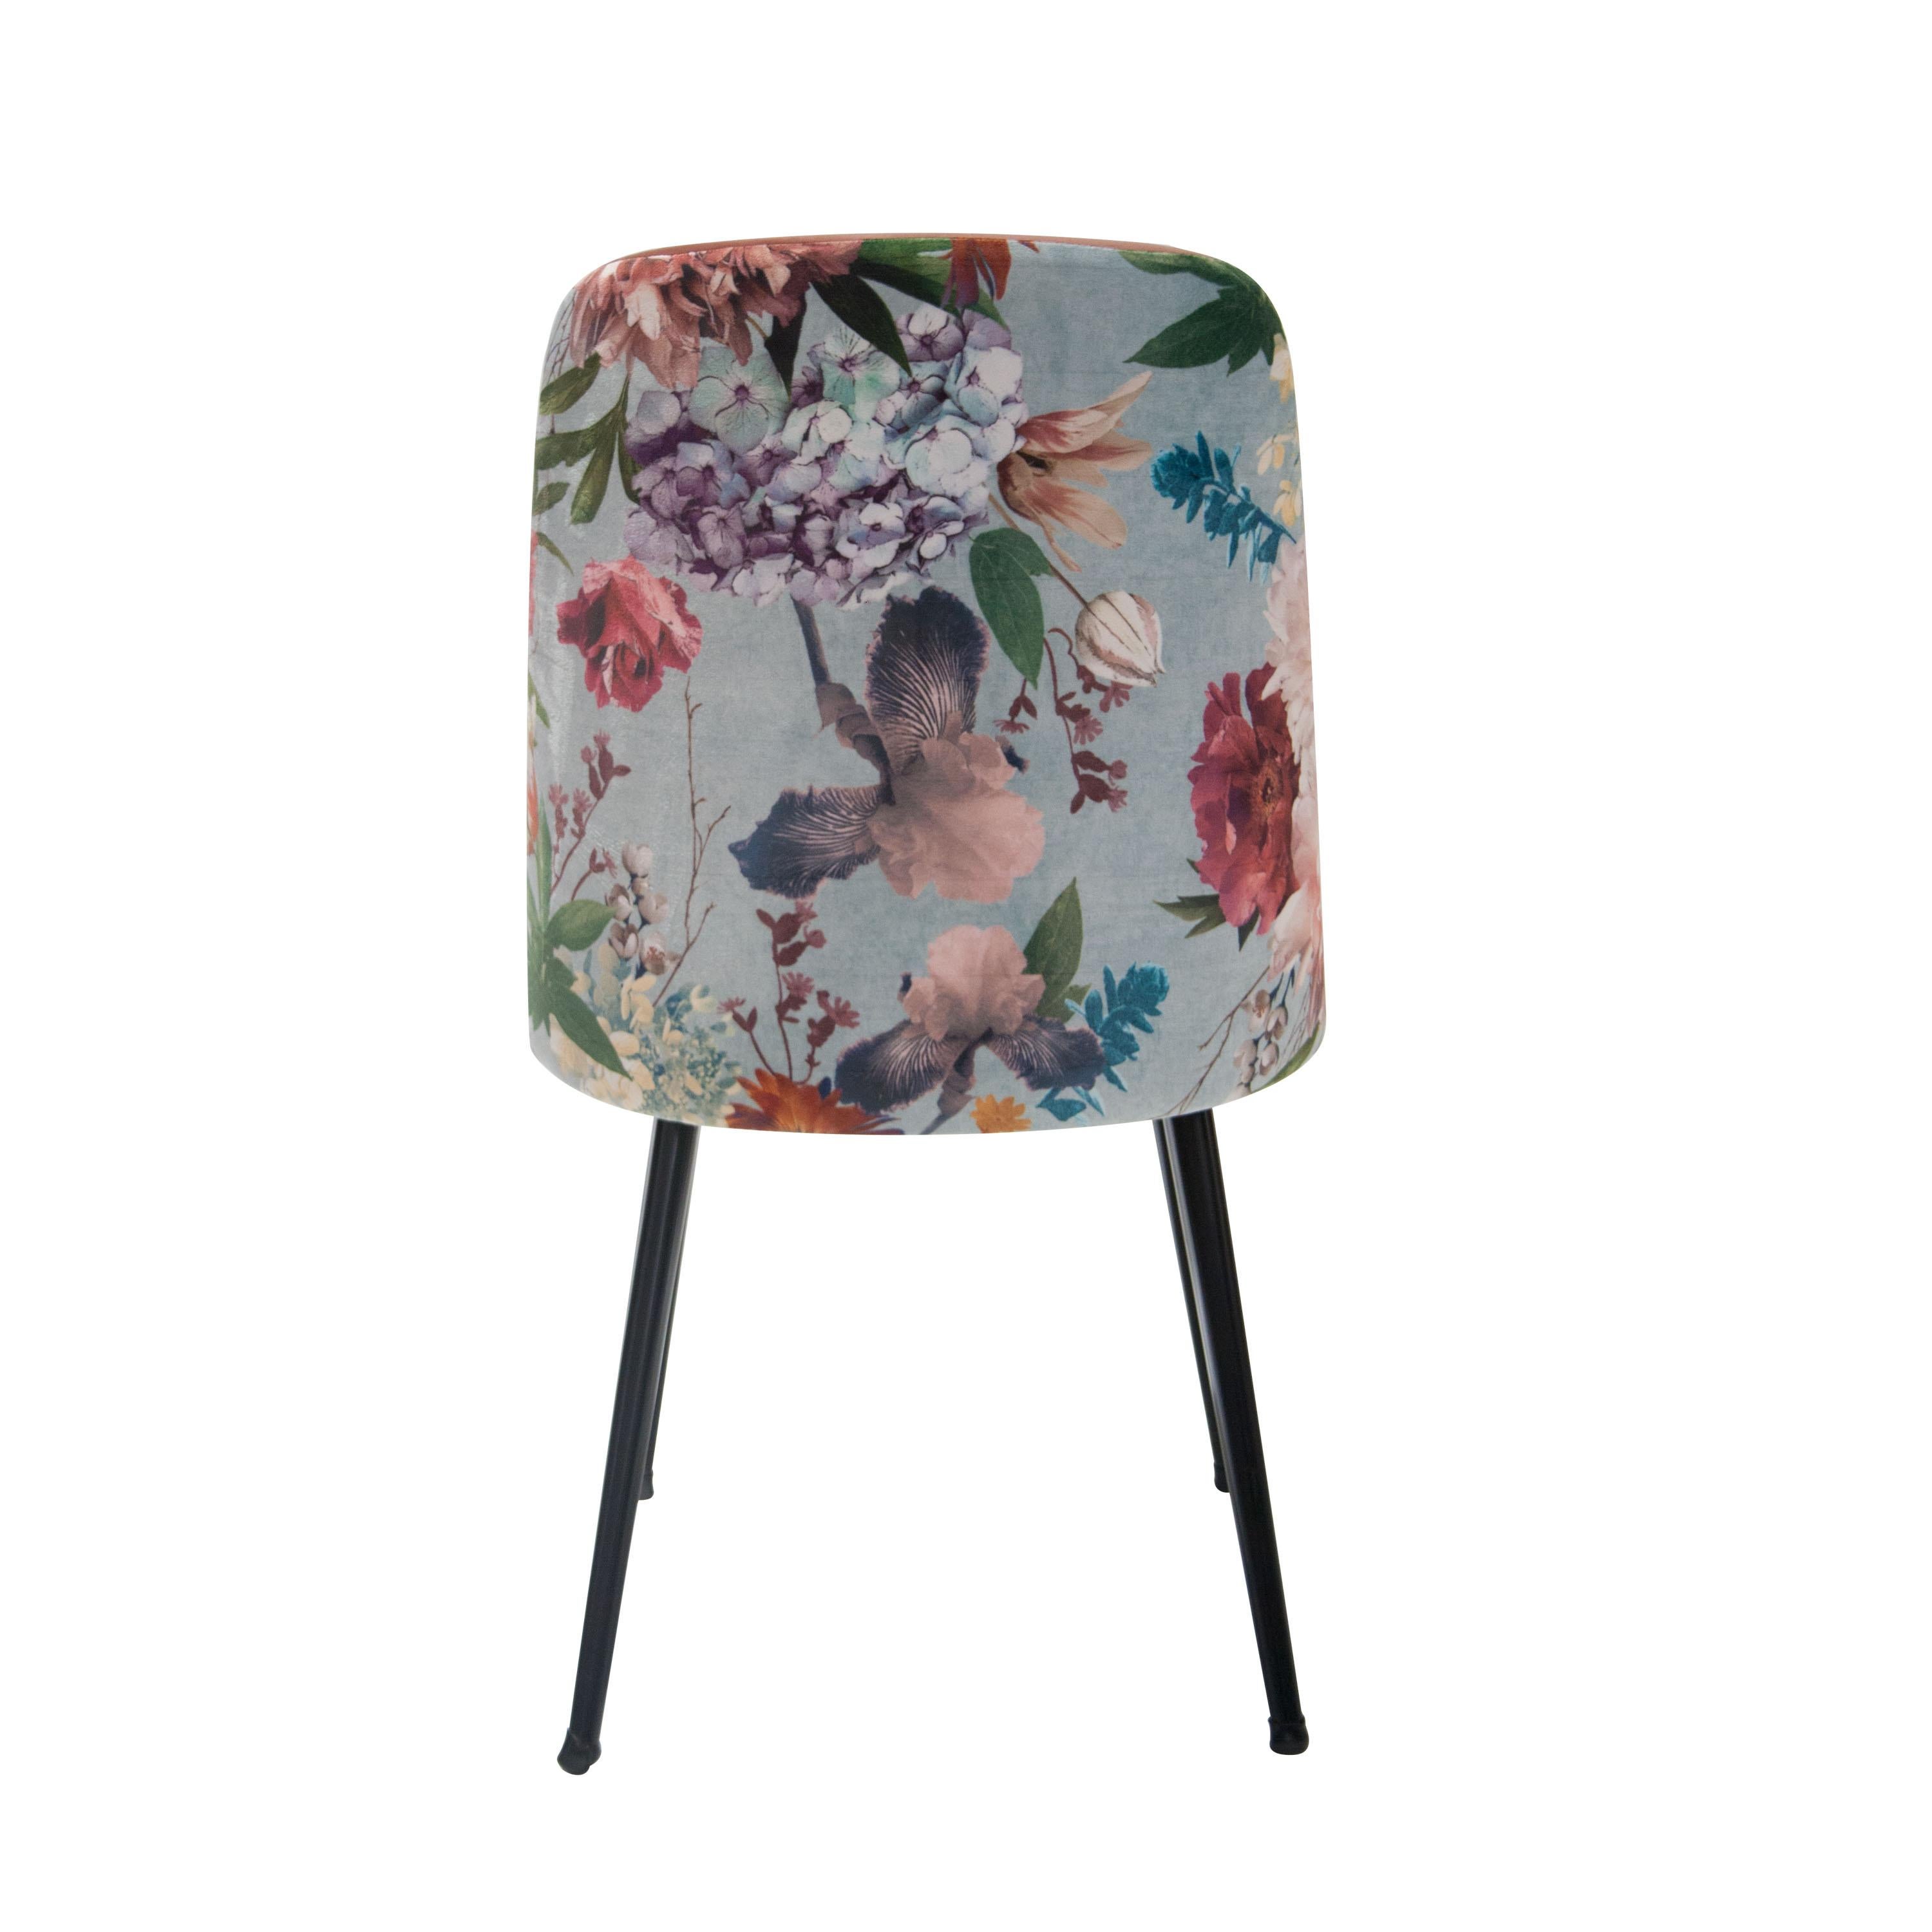 Italian set of 4 chairs with back and seat upholstered in old pink velvet and the back with flowers print. Solid wooden structure with black lacquered metallic conical legs.